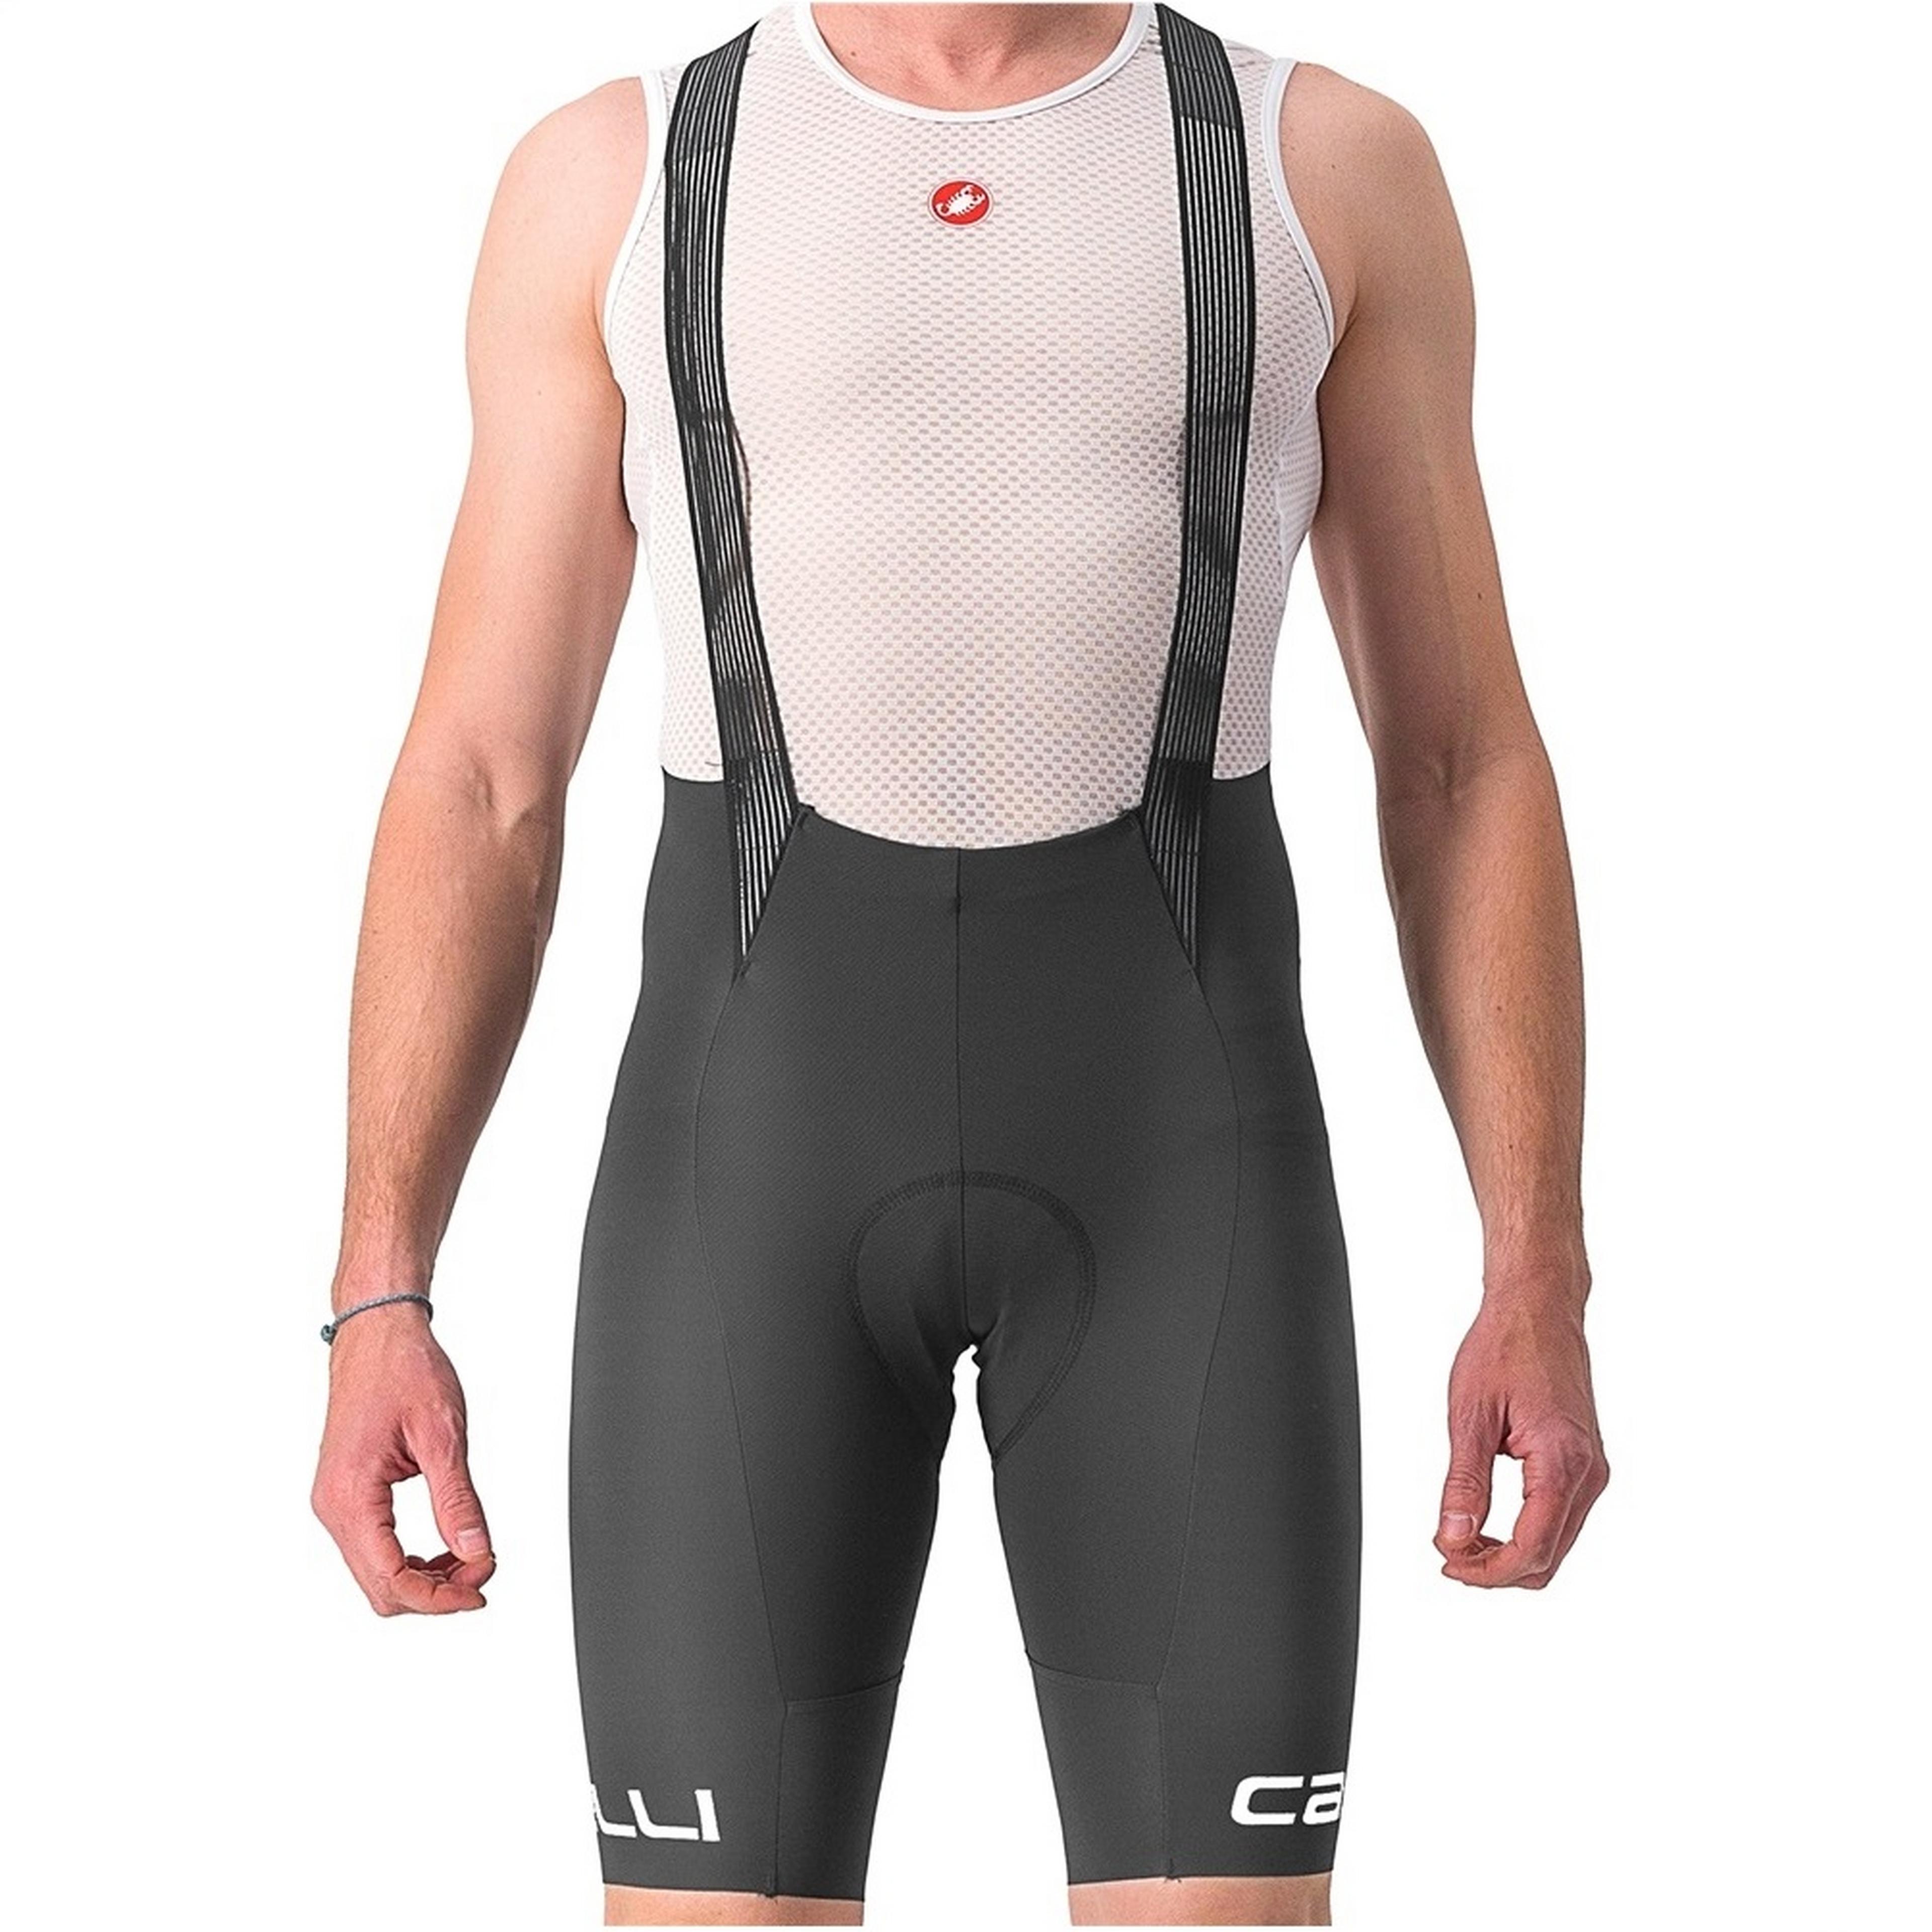 Best cycling bib shorts to buy in 2023